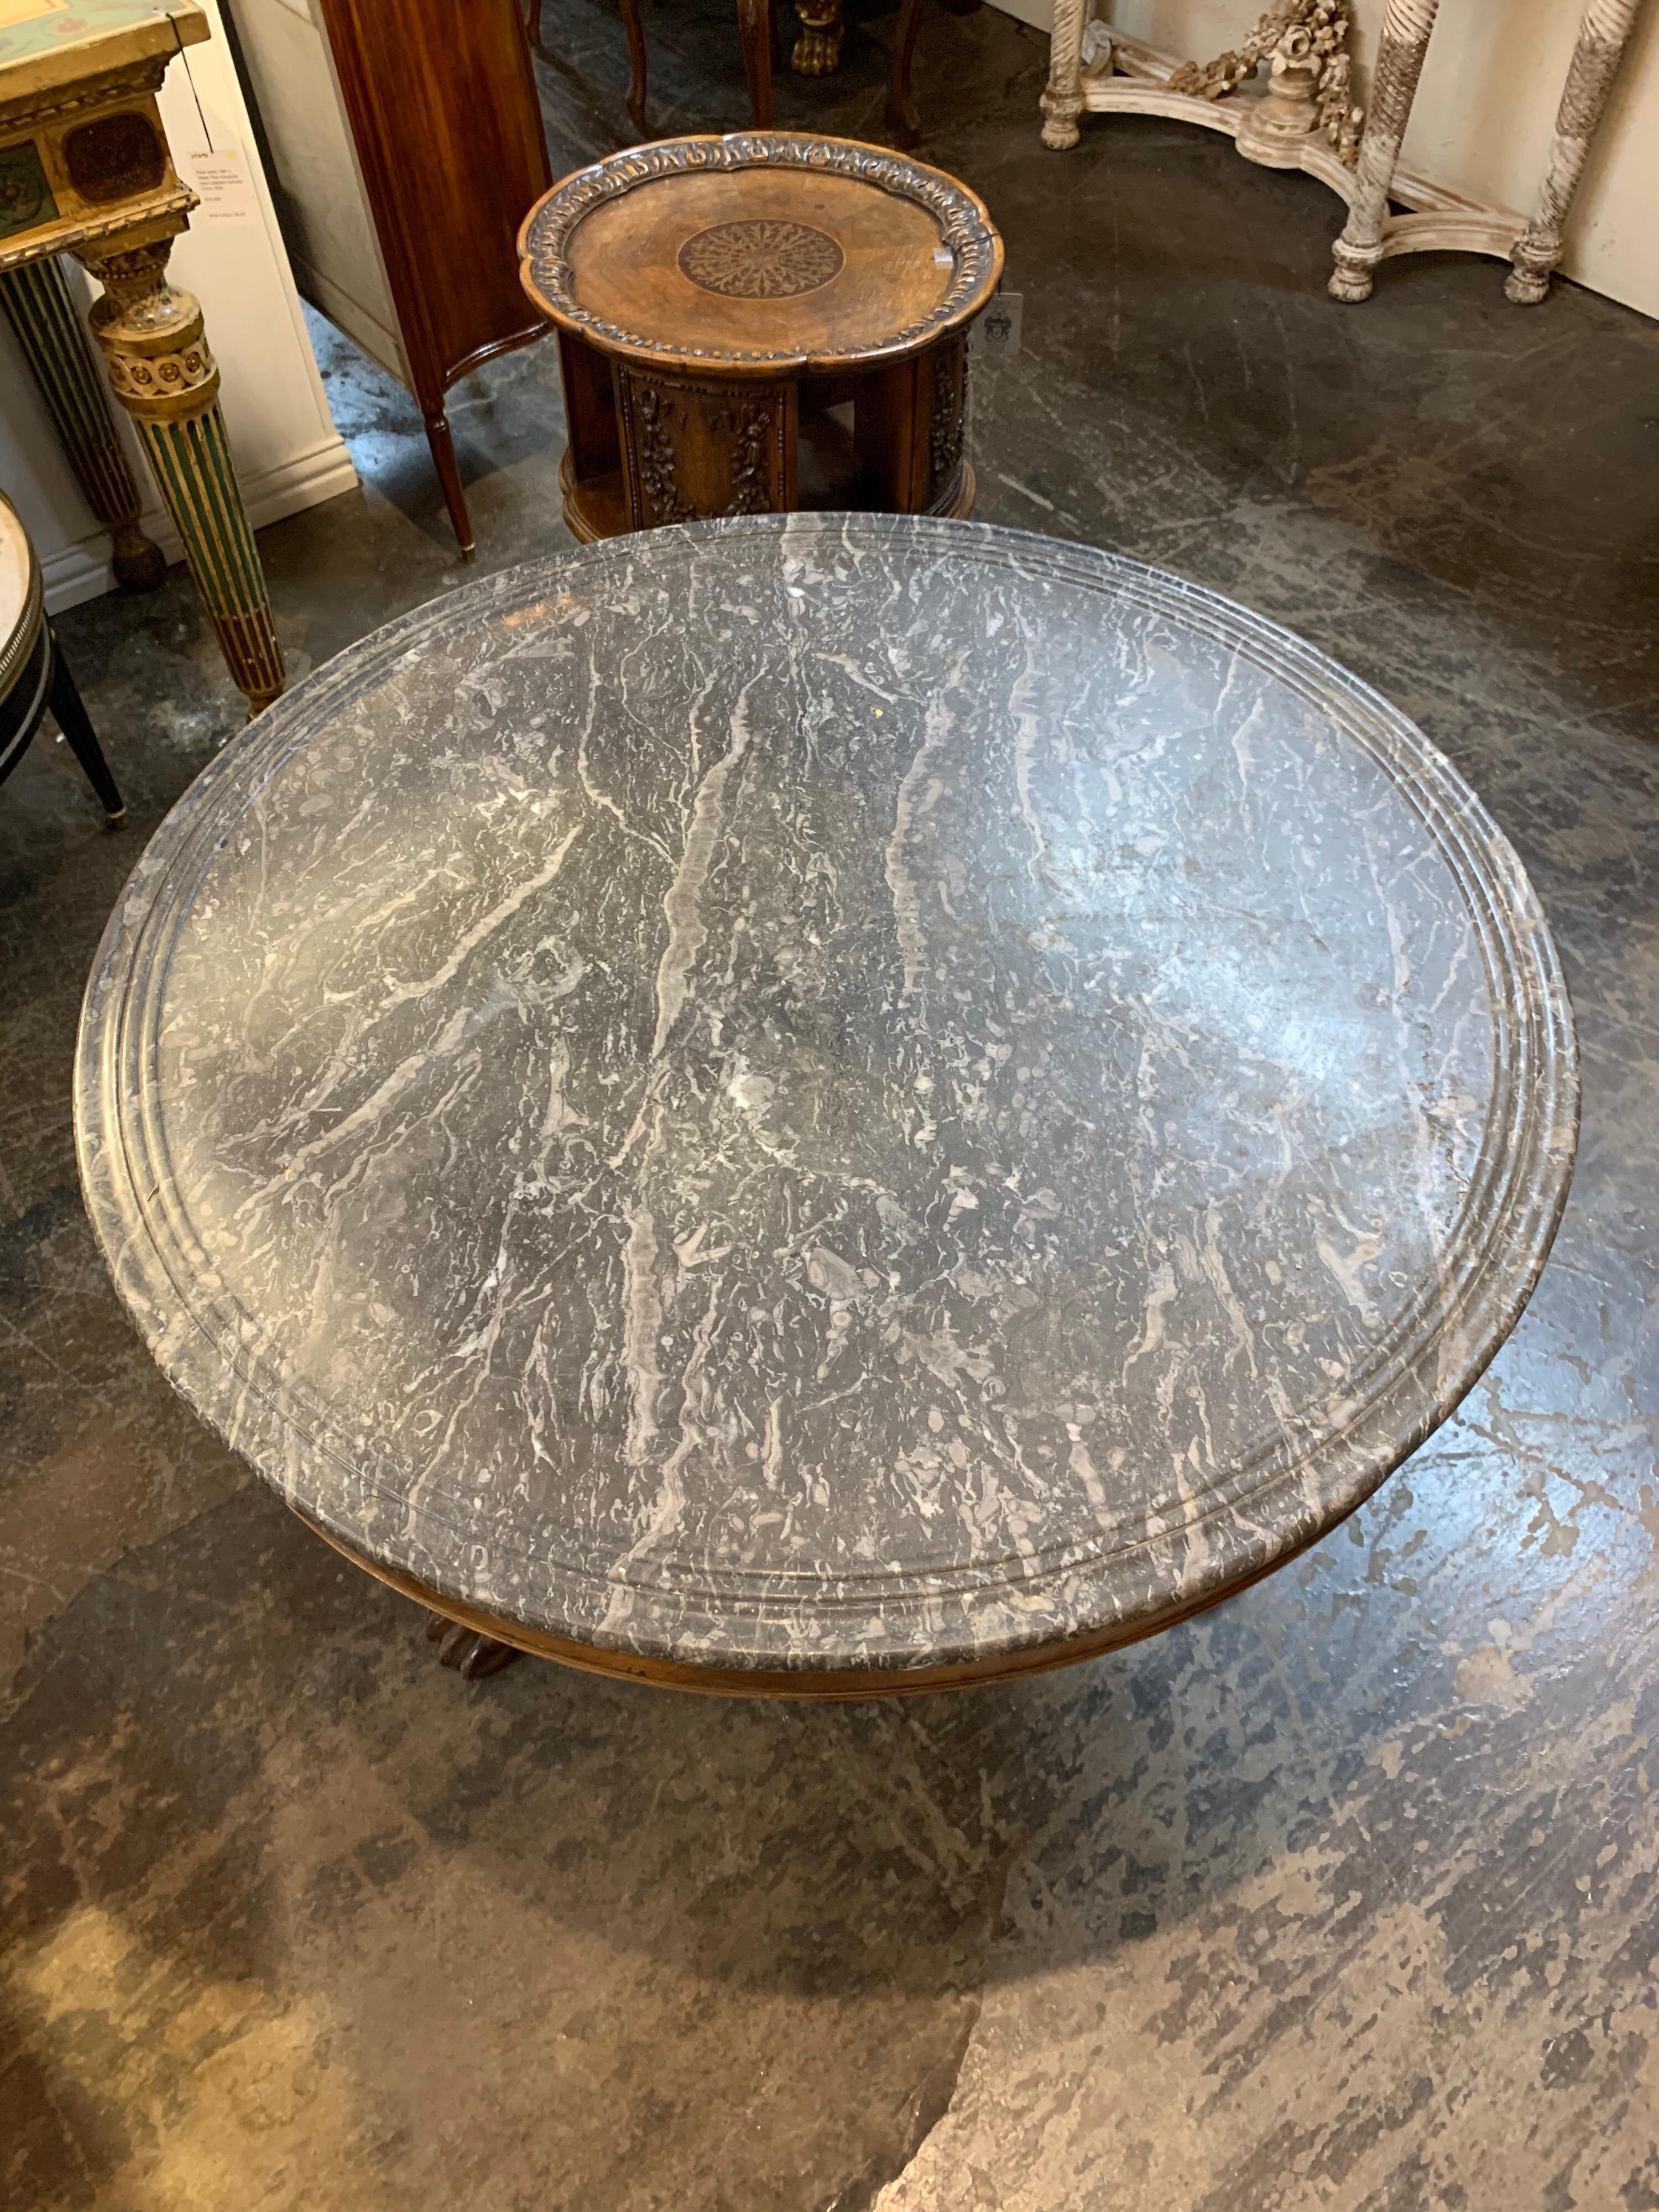 Very handsome 19th century Charles X carved mahogany table. Nice carvings and the piece has an original grey marble top. A beautiful classic style!